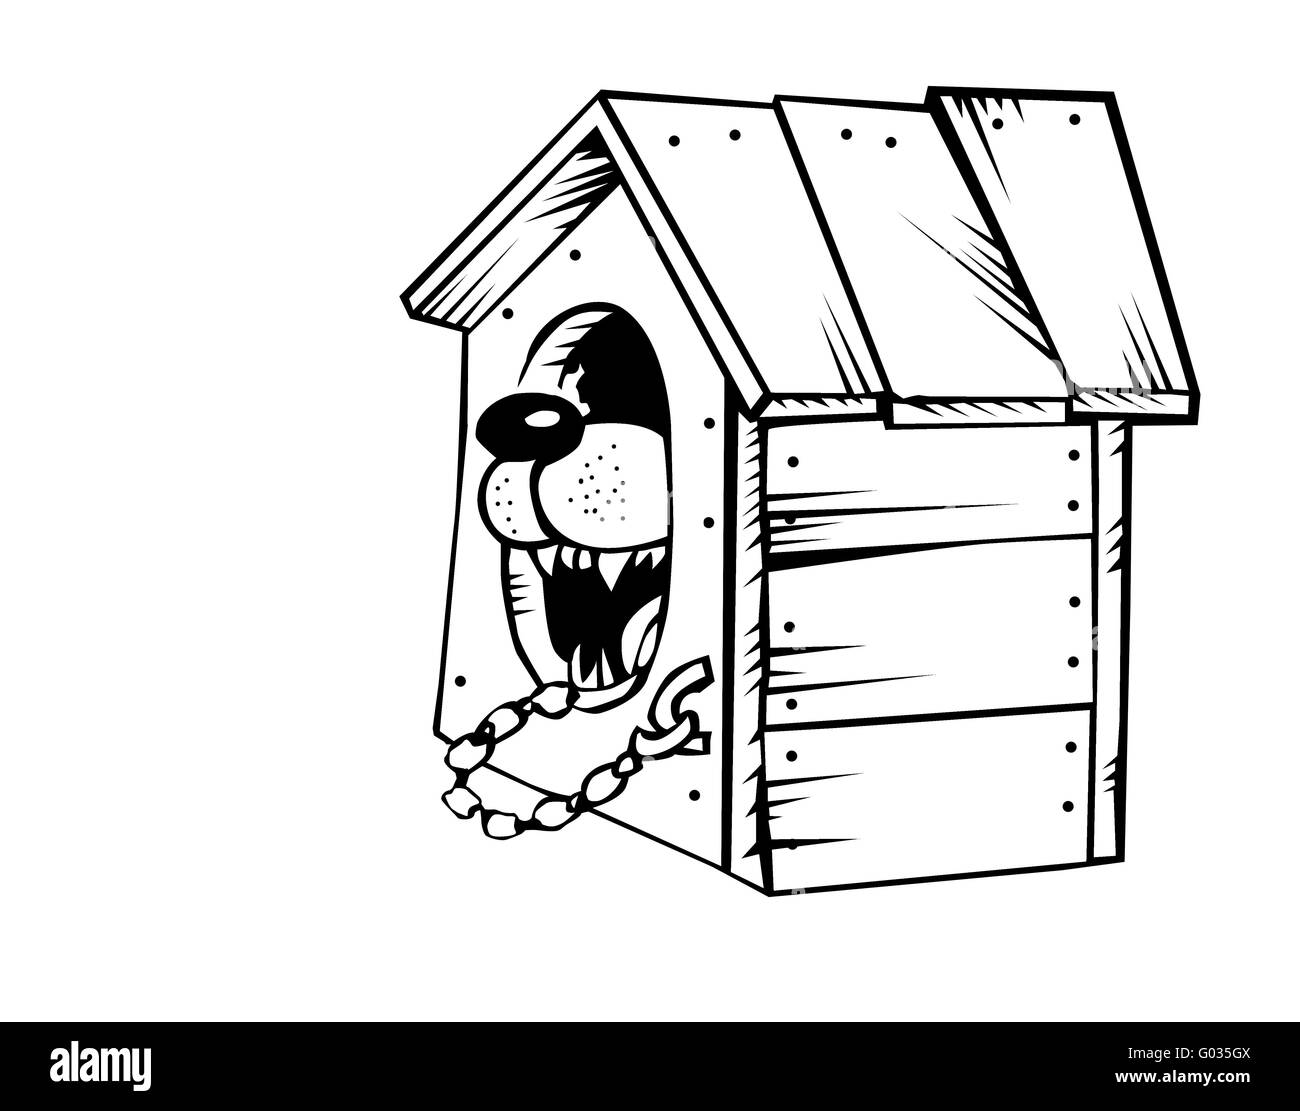 vector drawing of the dog in kennel on white background Stock Photo